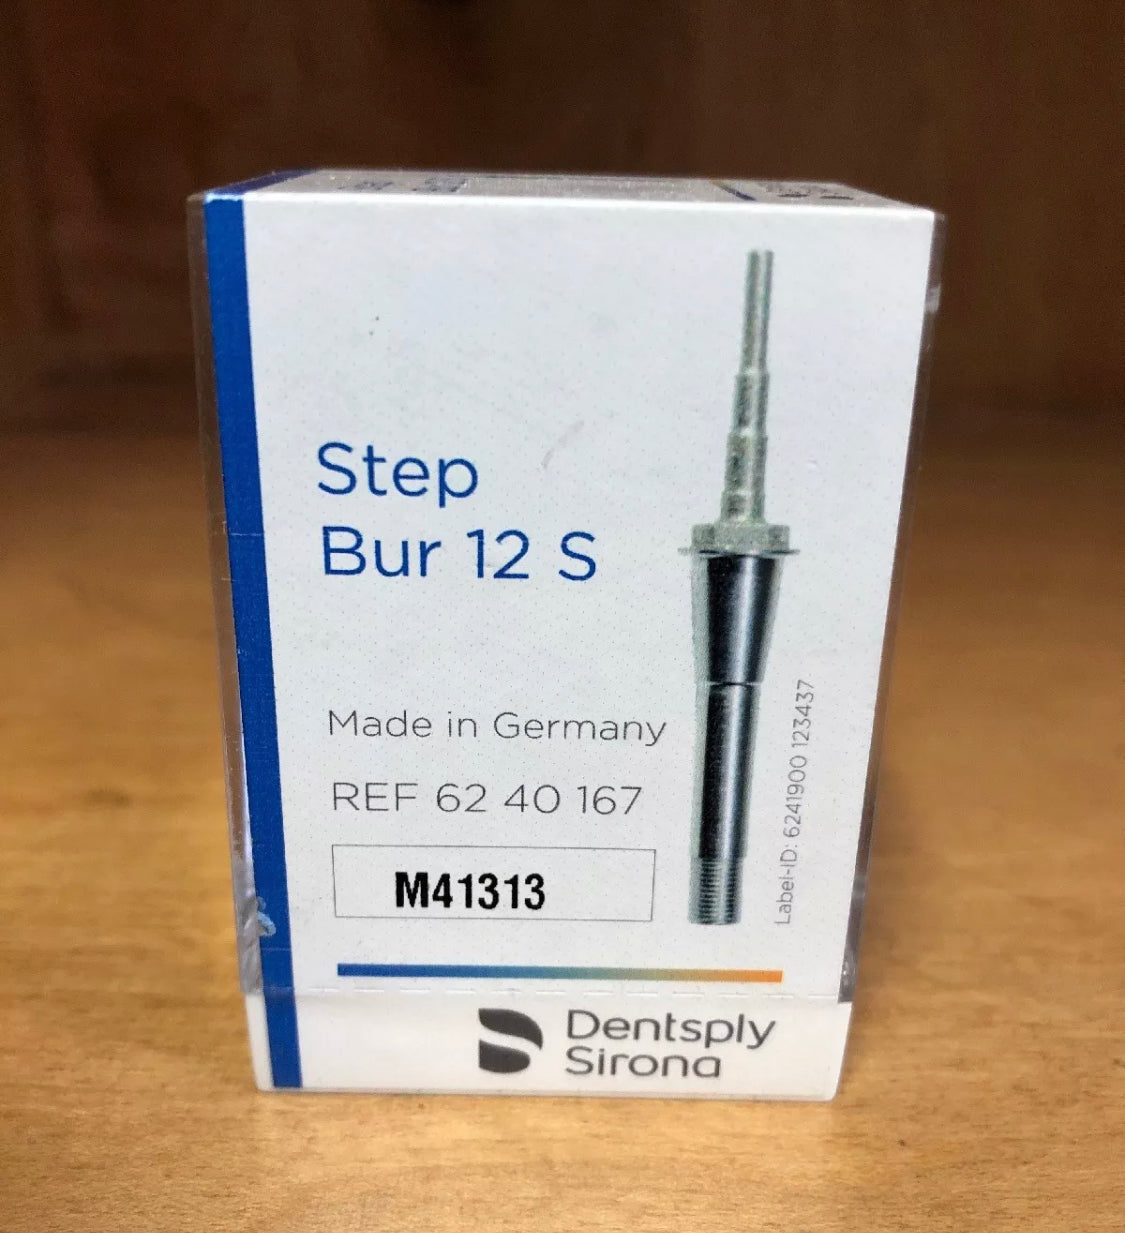 Step Bur 12 S – SIX Included- Brand New UNOPENED